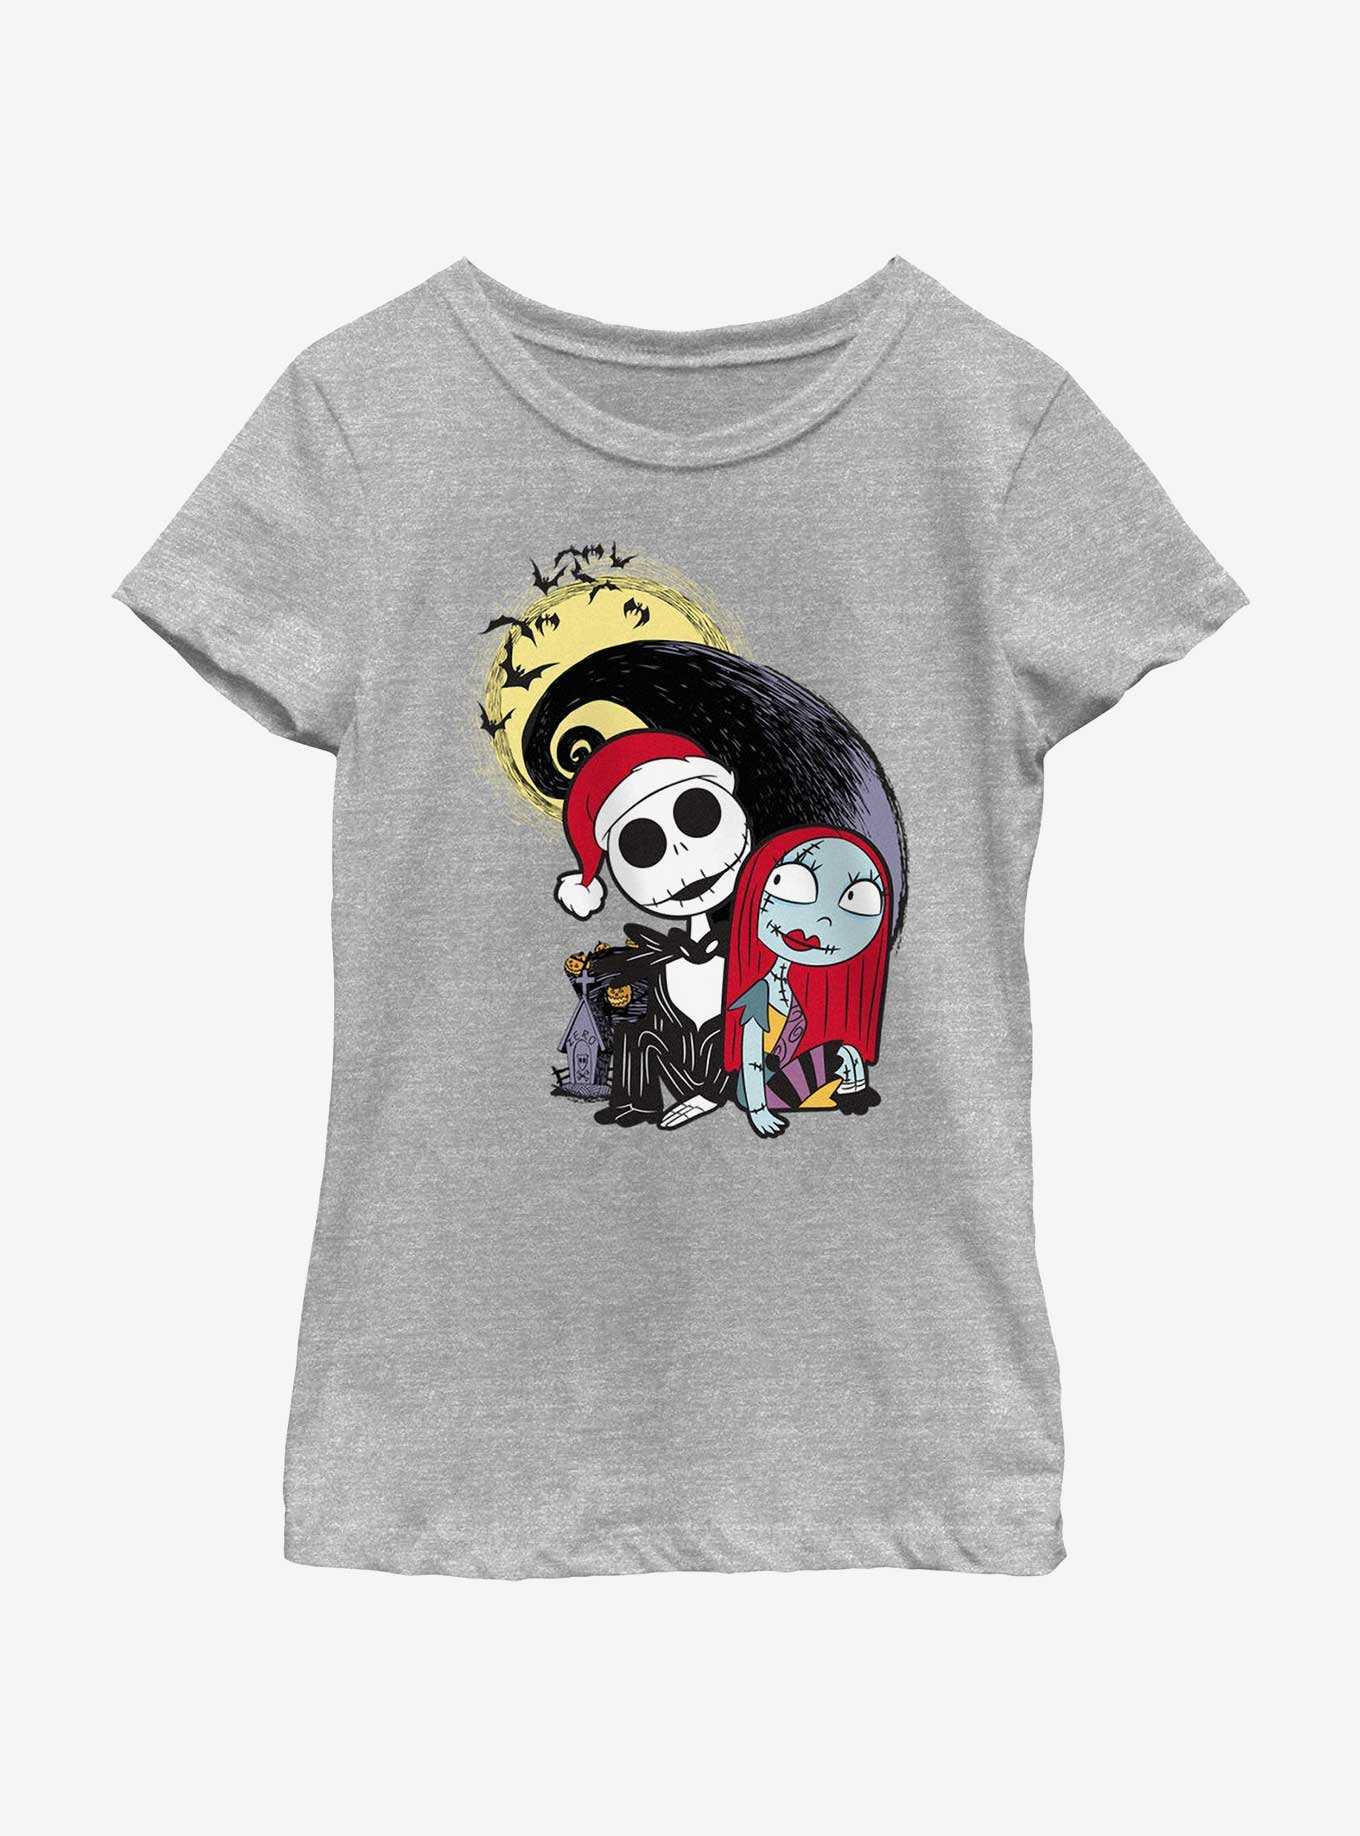 Disney The Nightmare Before Christmas Santa Jack and Sally Youth Girls T-Shirt, , hi-res